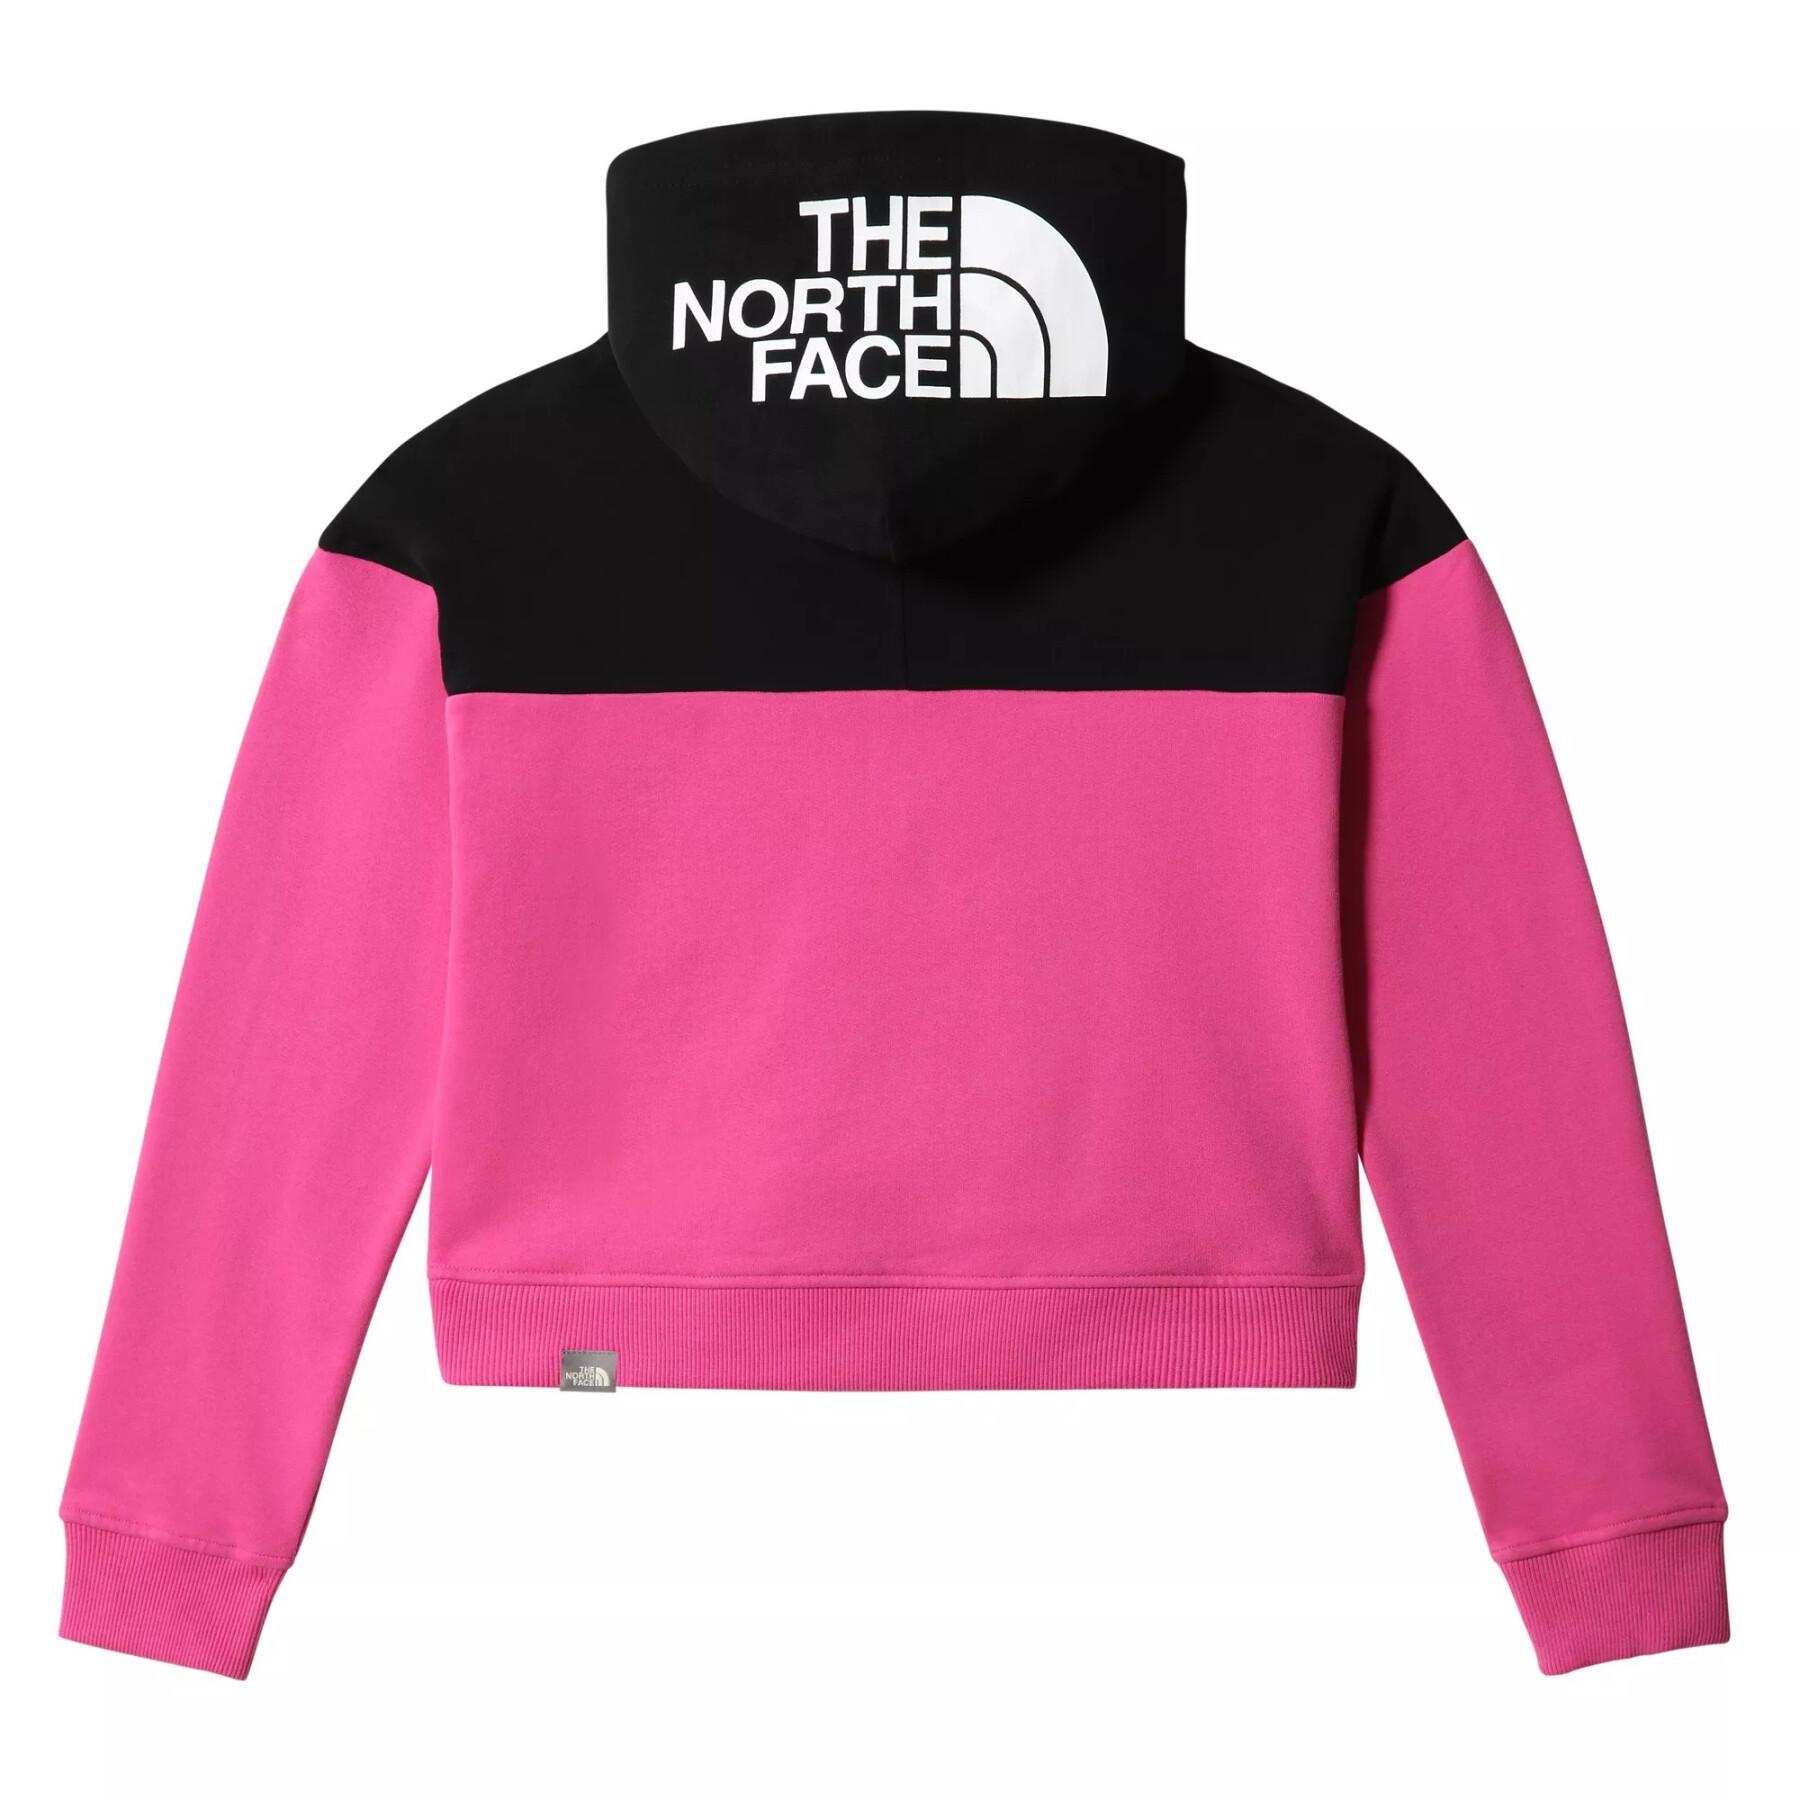 Meisjeshoodie The North Face